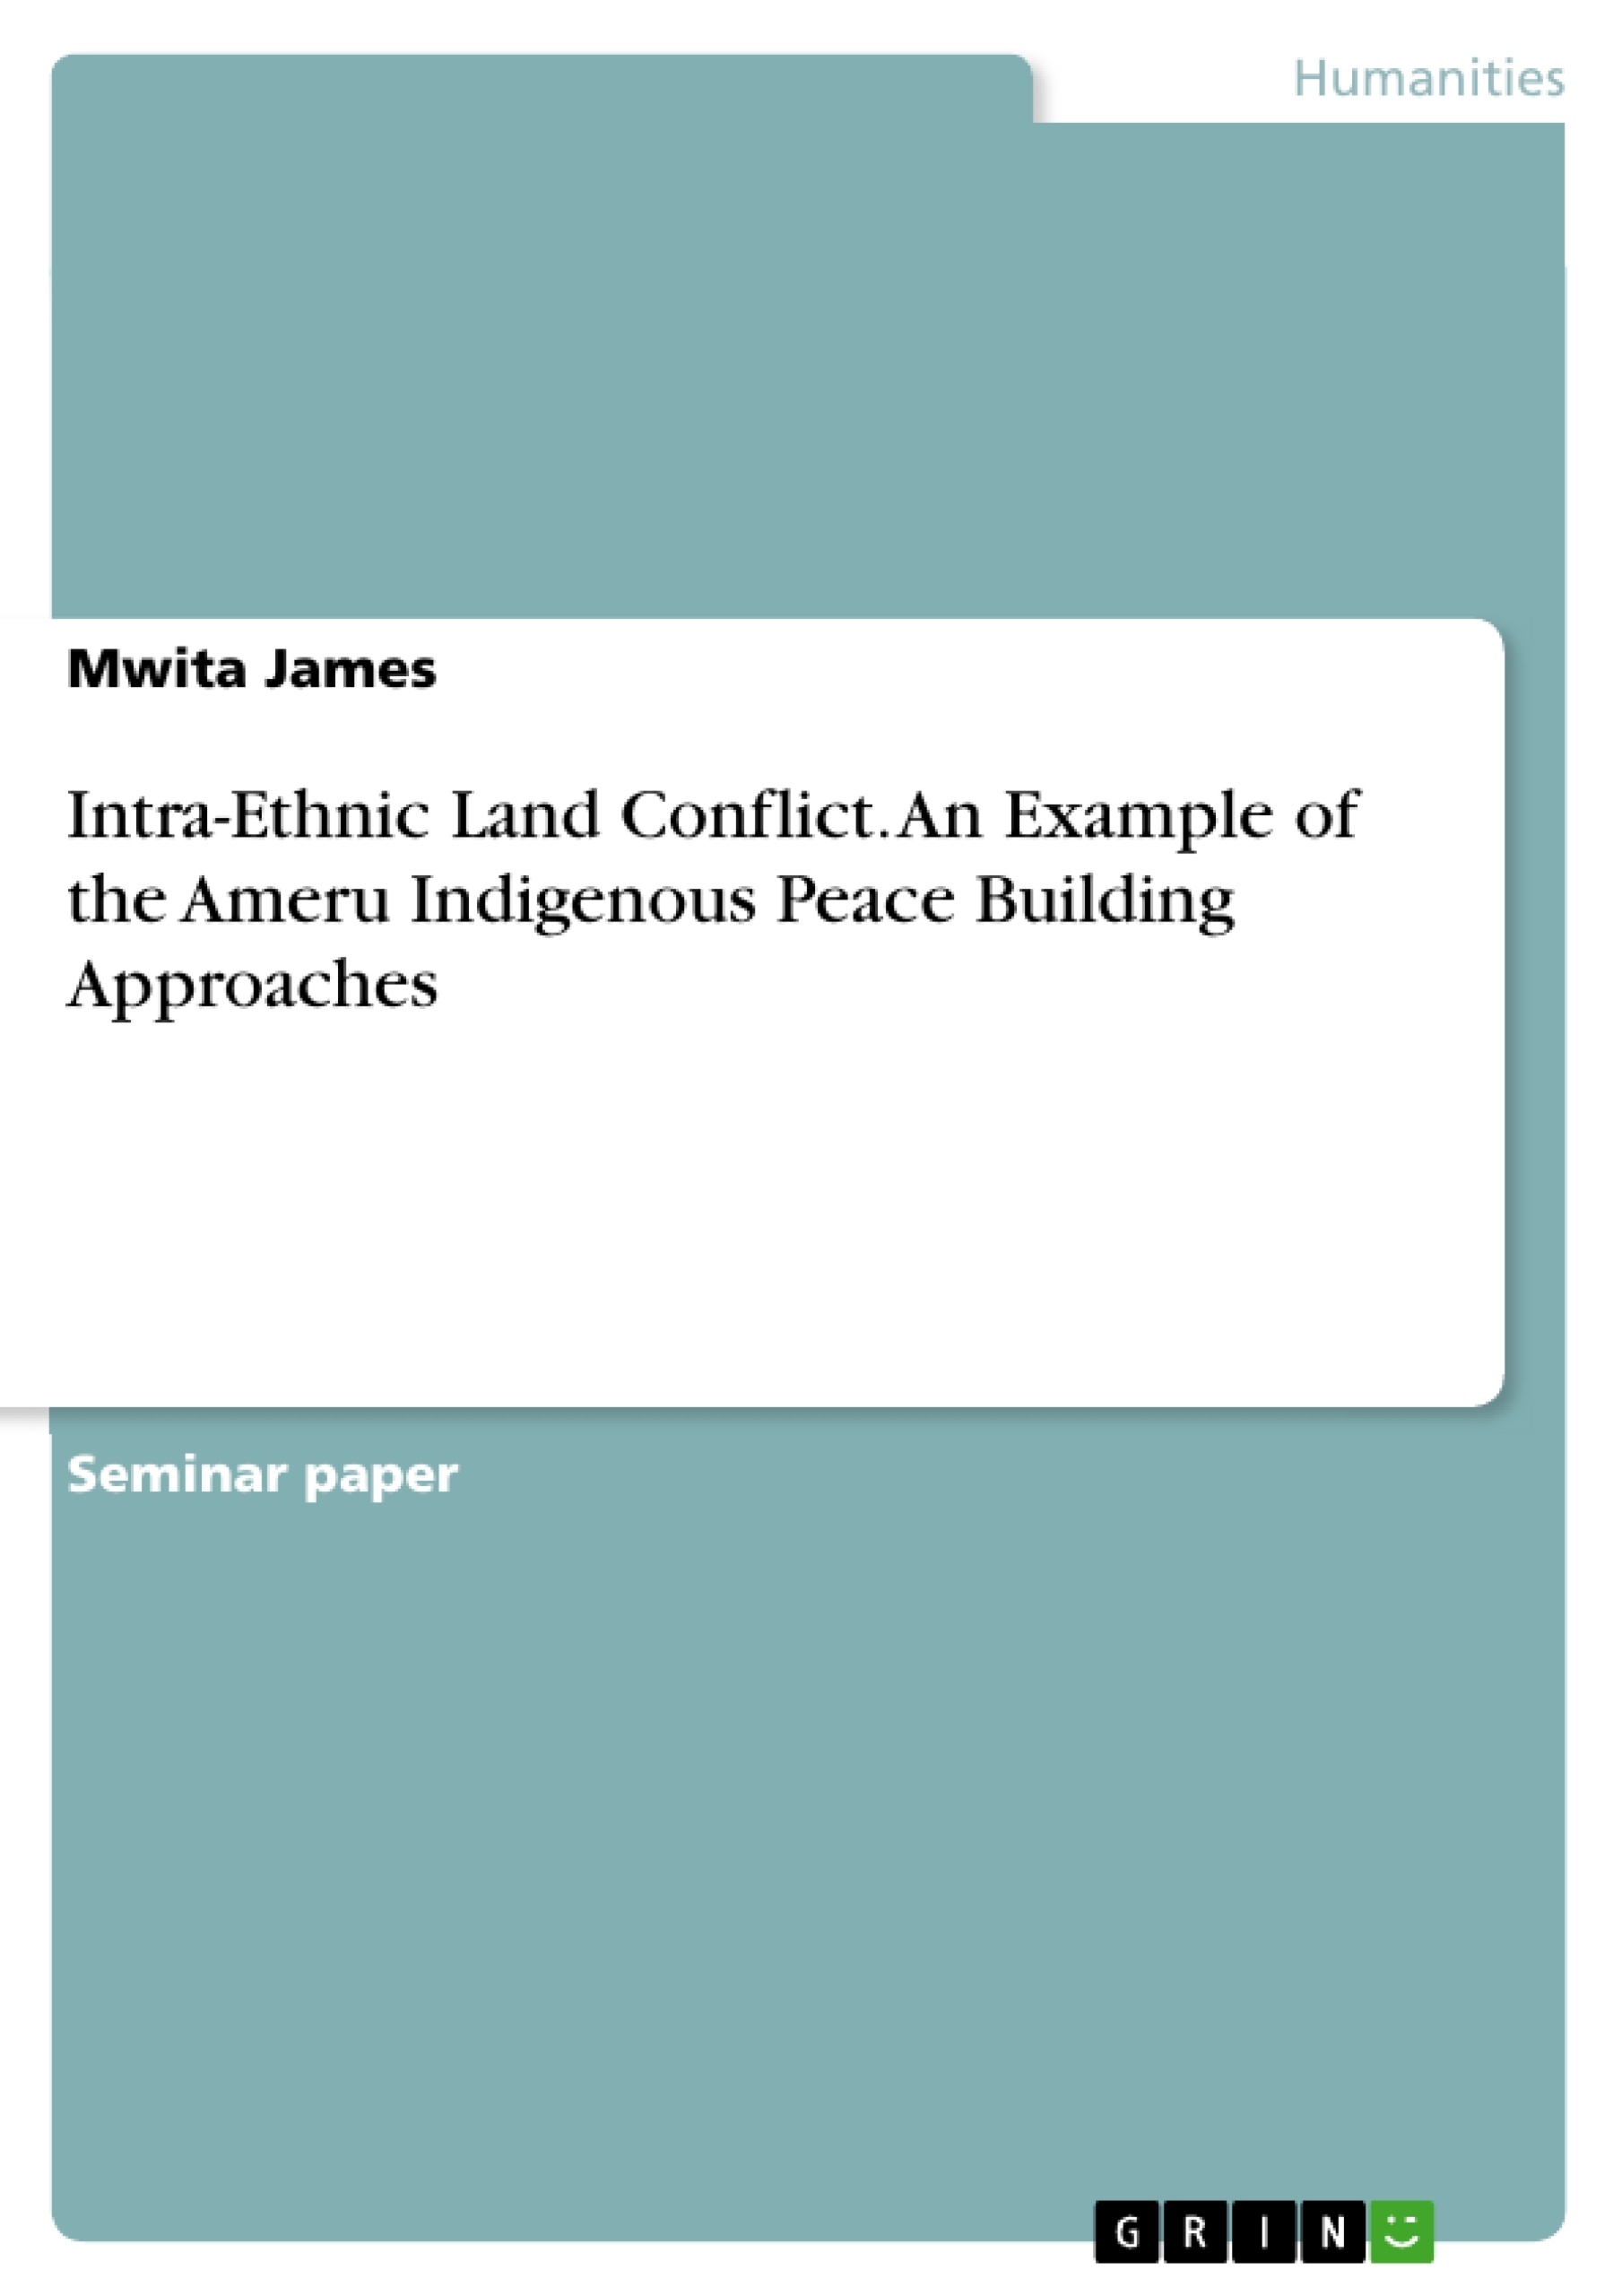 Título: Intra-Ethnic Land Conflict. An Example of the Ameru Indigenous Peace Building Approaches